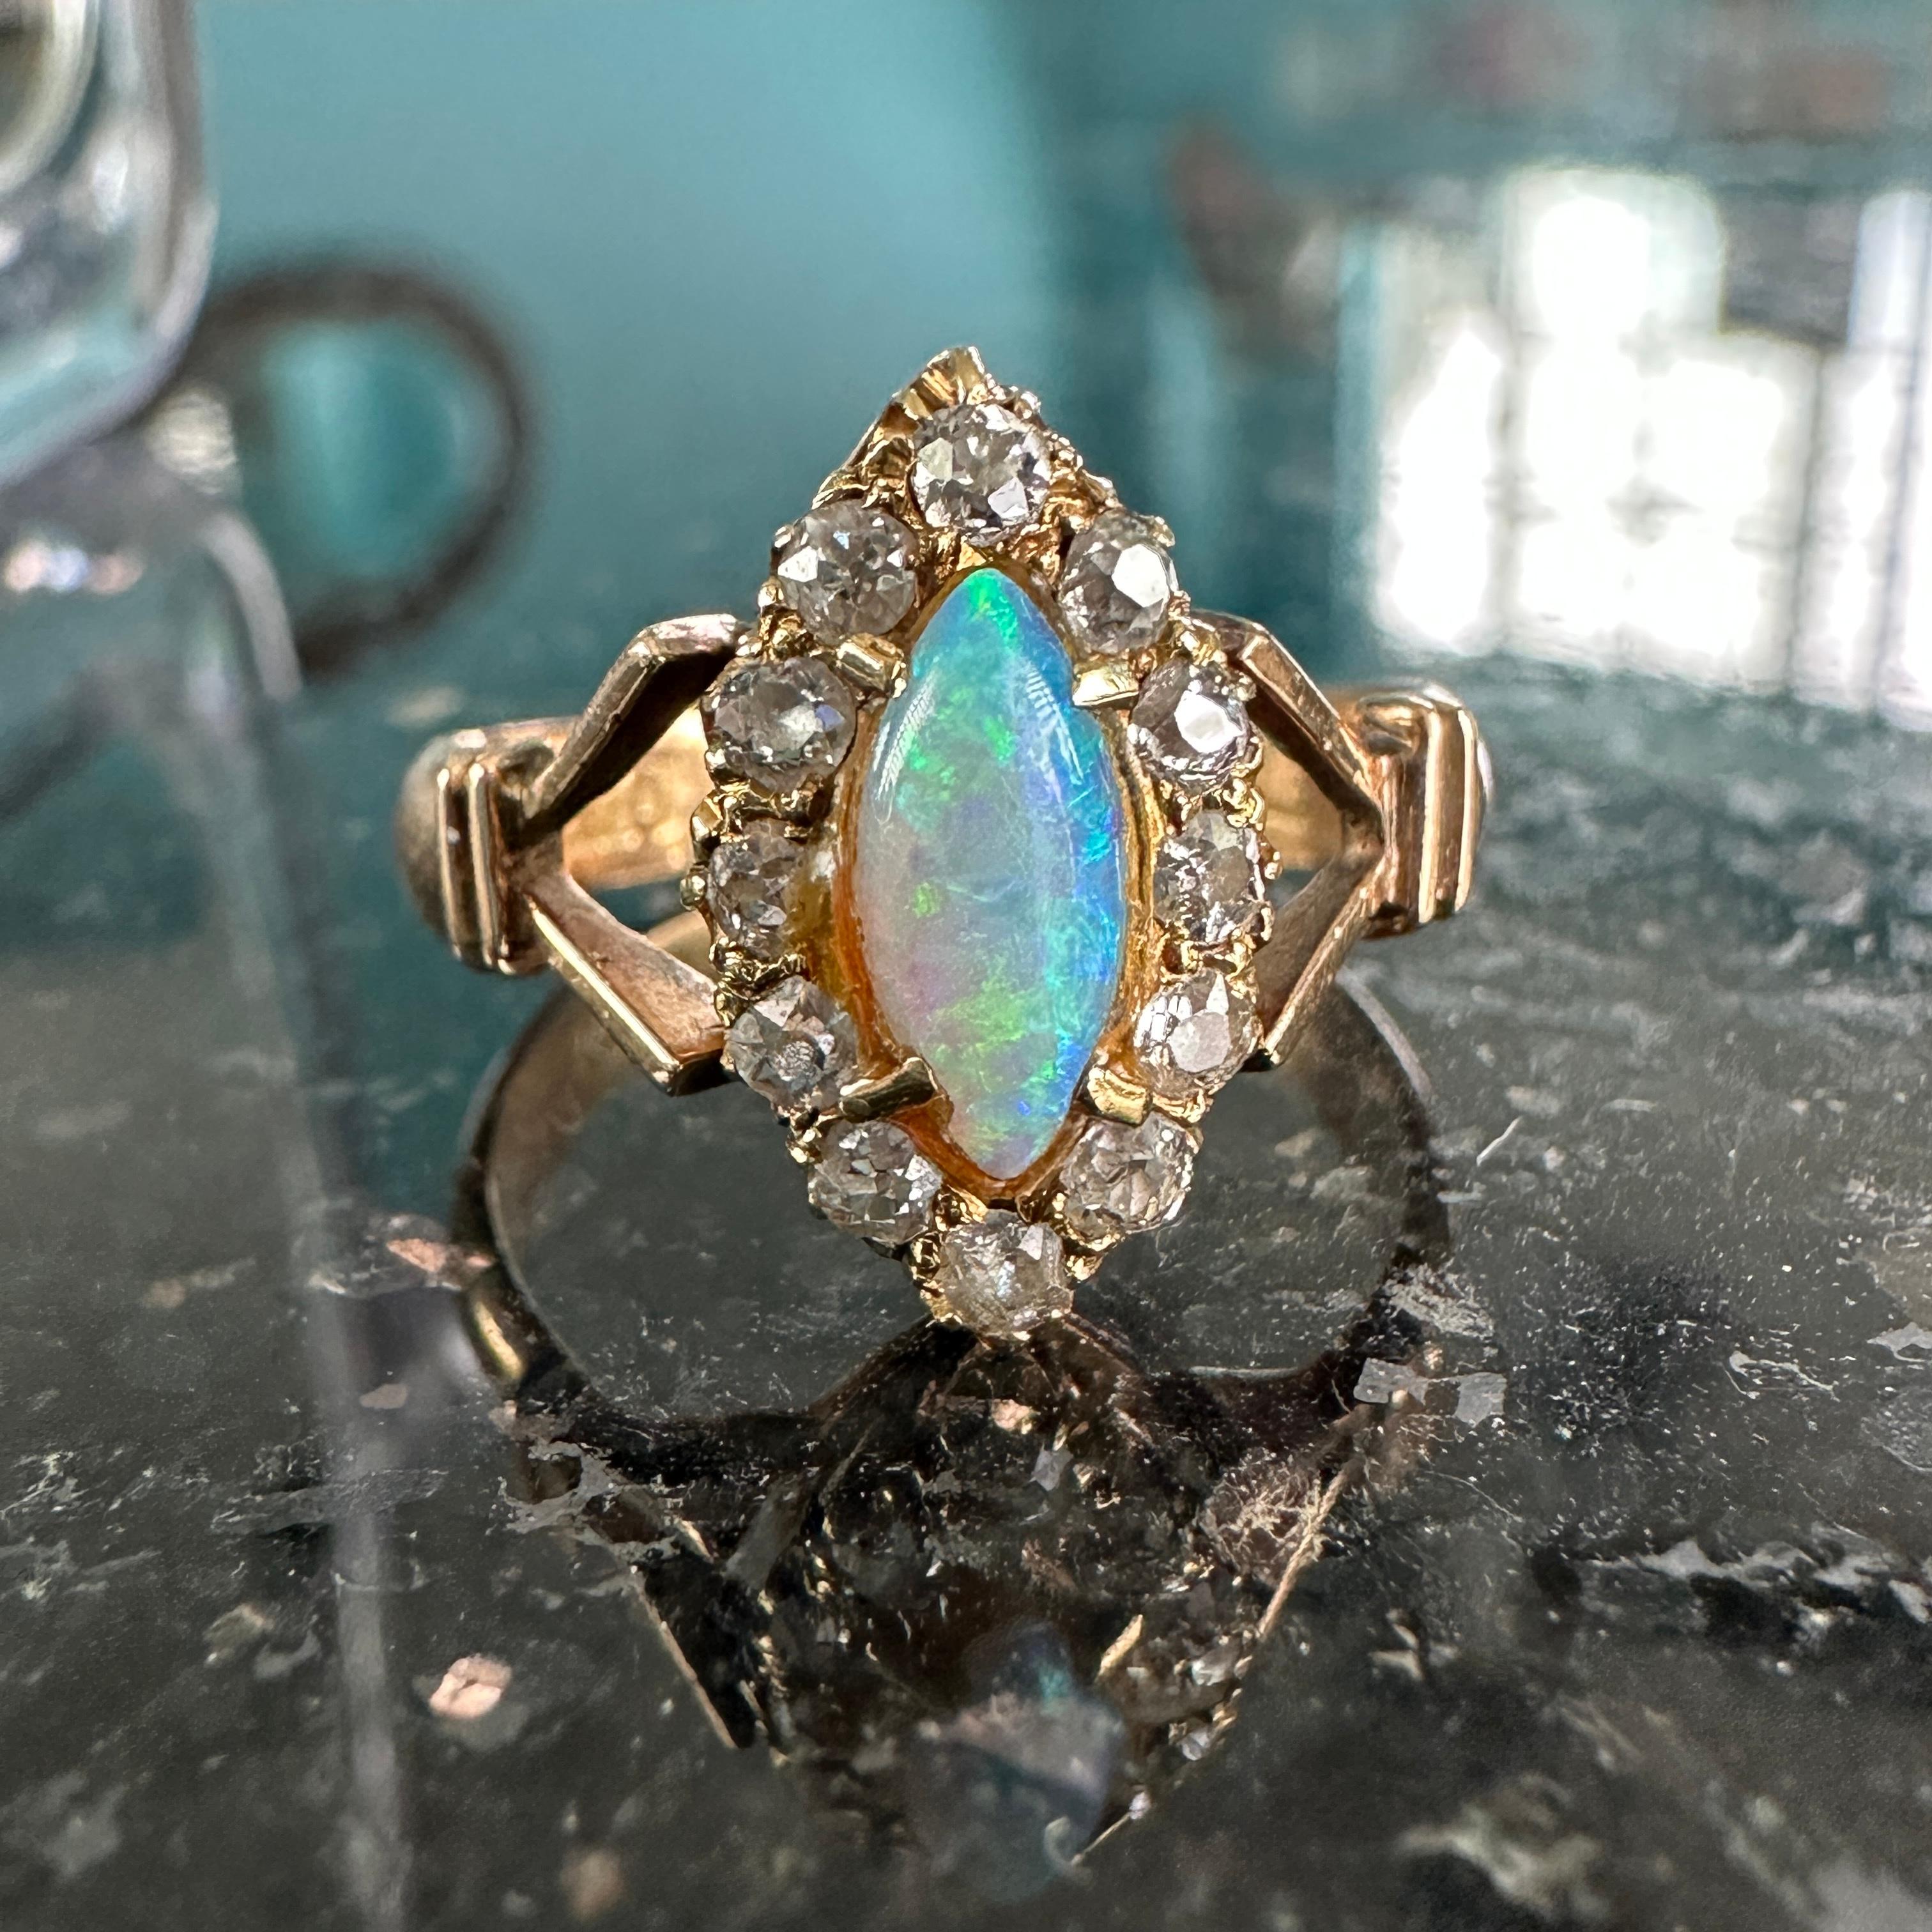 Details:
Fabulous Victorian Navette opal and diamond ring set in 18K subtle rose gold. The band has fantastic detailing, and the diamonds are lovely rose cuts. The full spectrum opal measures 8.8mm x 4mm, and has deep blues, greens, pinks and